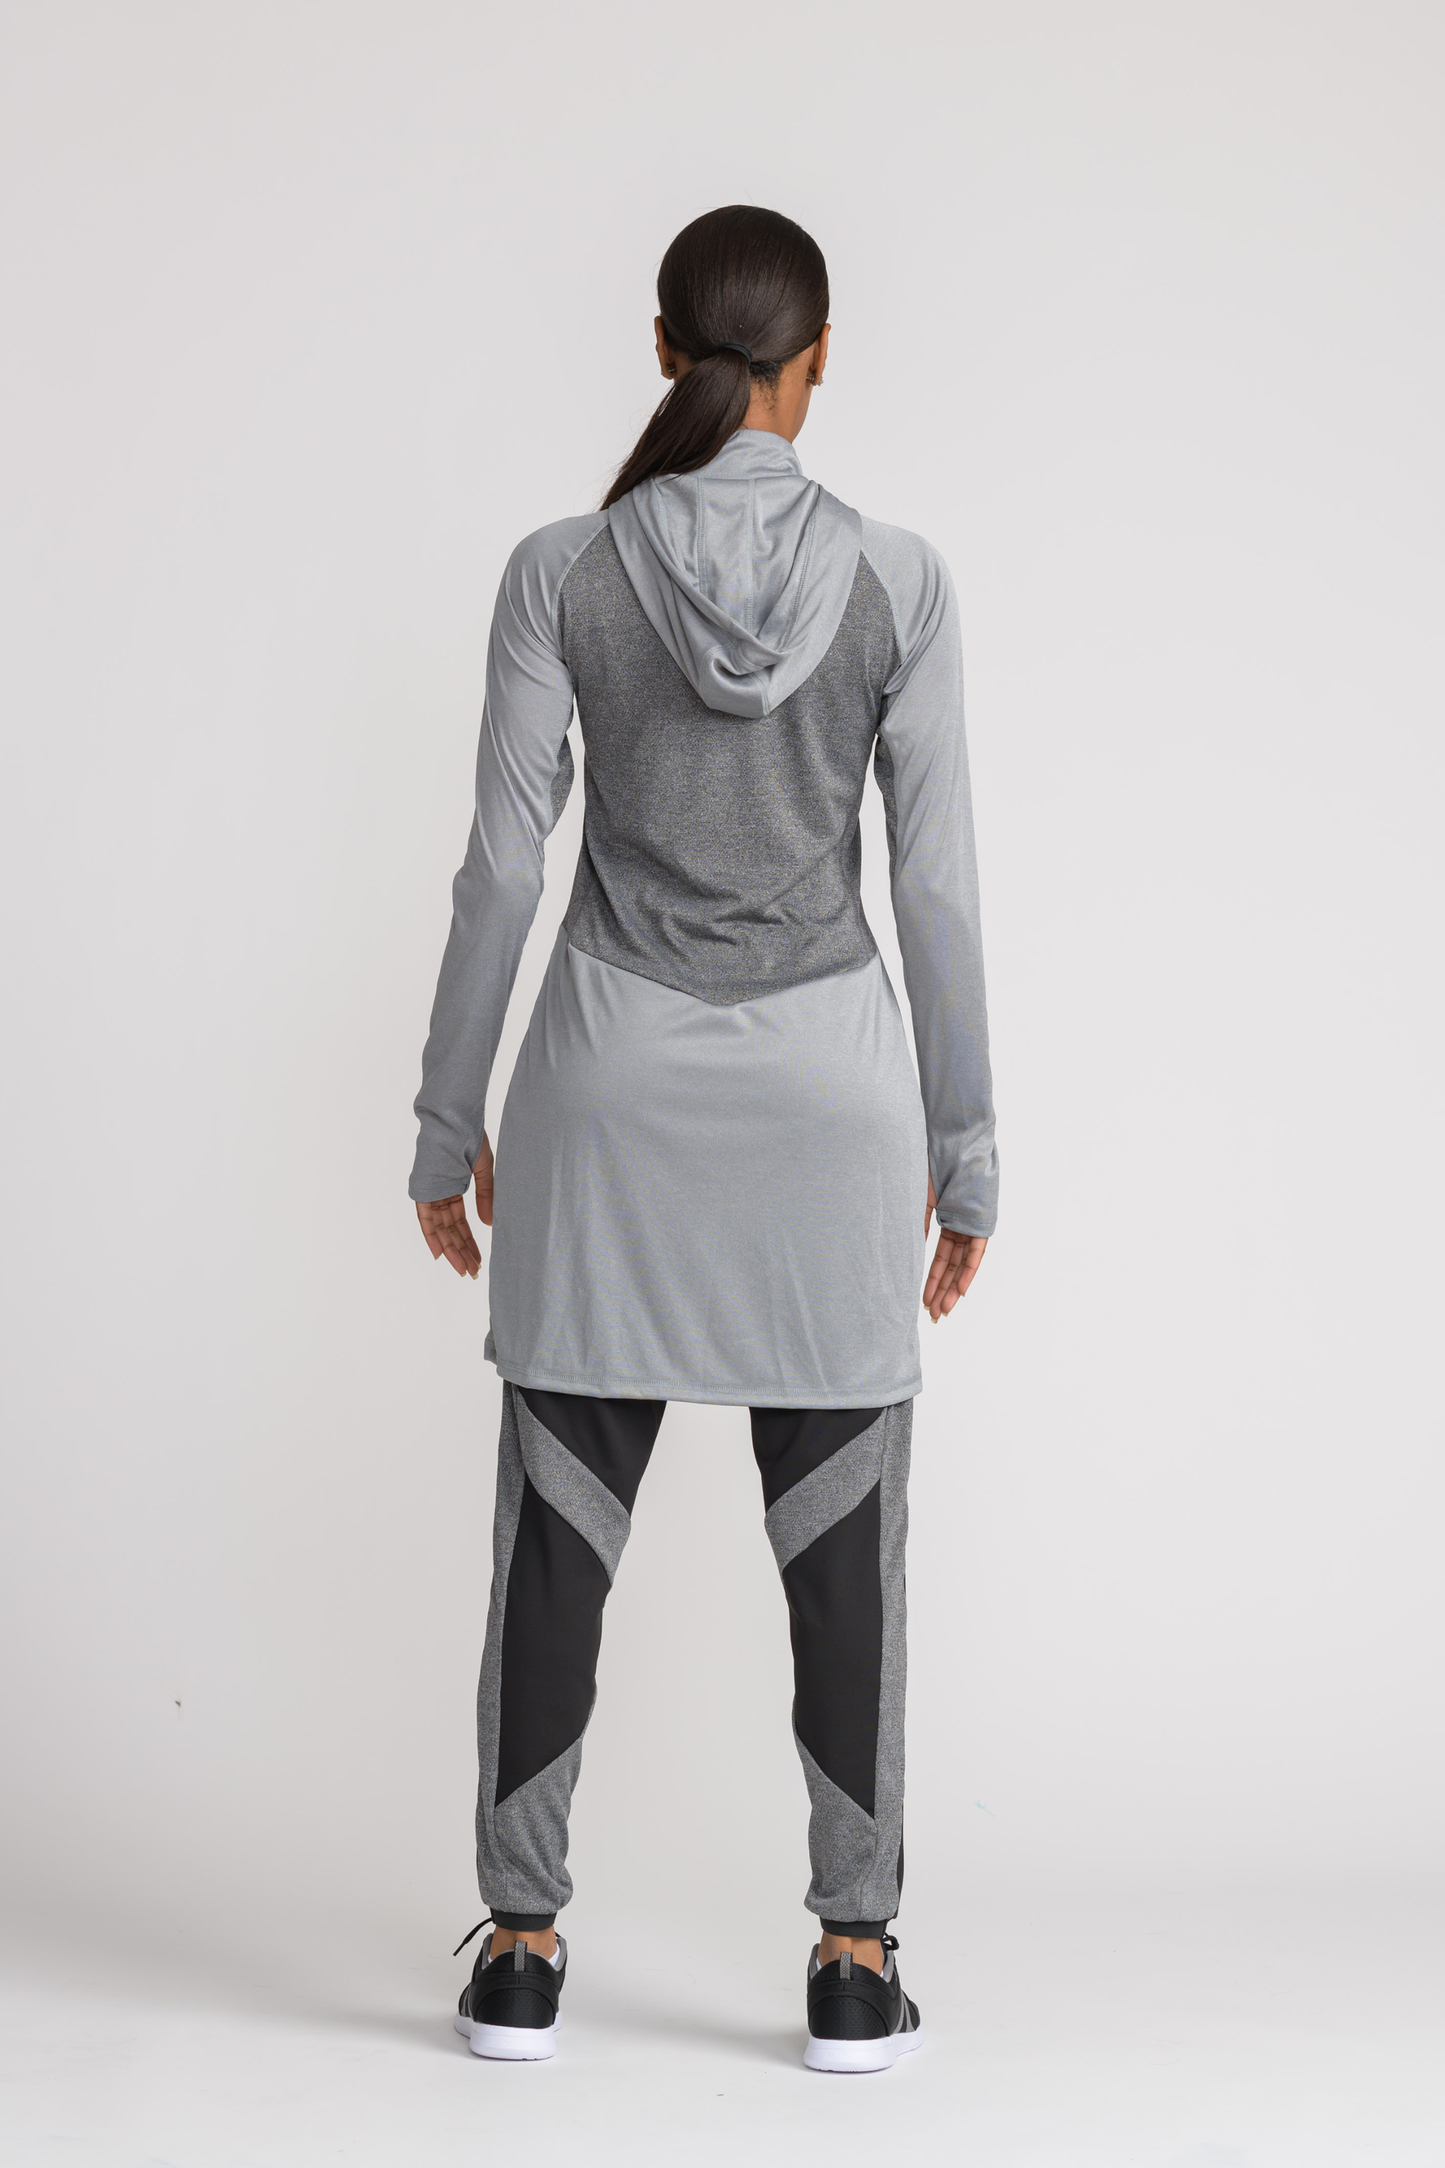 Performance Tech Top - Grey - sportswear tops - Dignitii Activewear - Third Culture Boutique